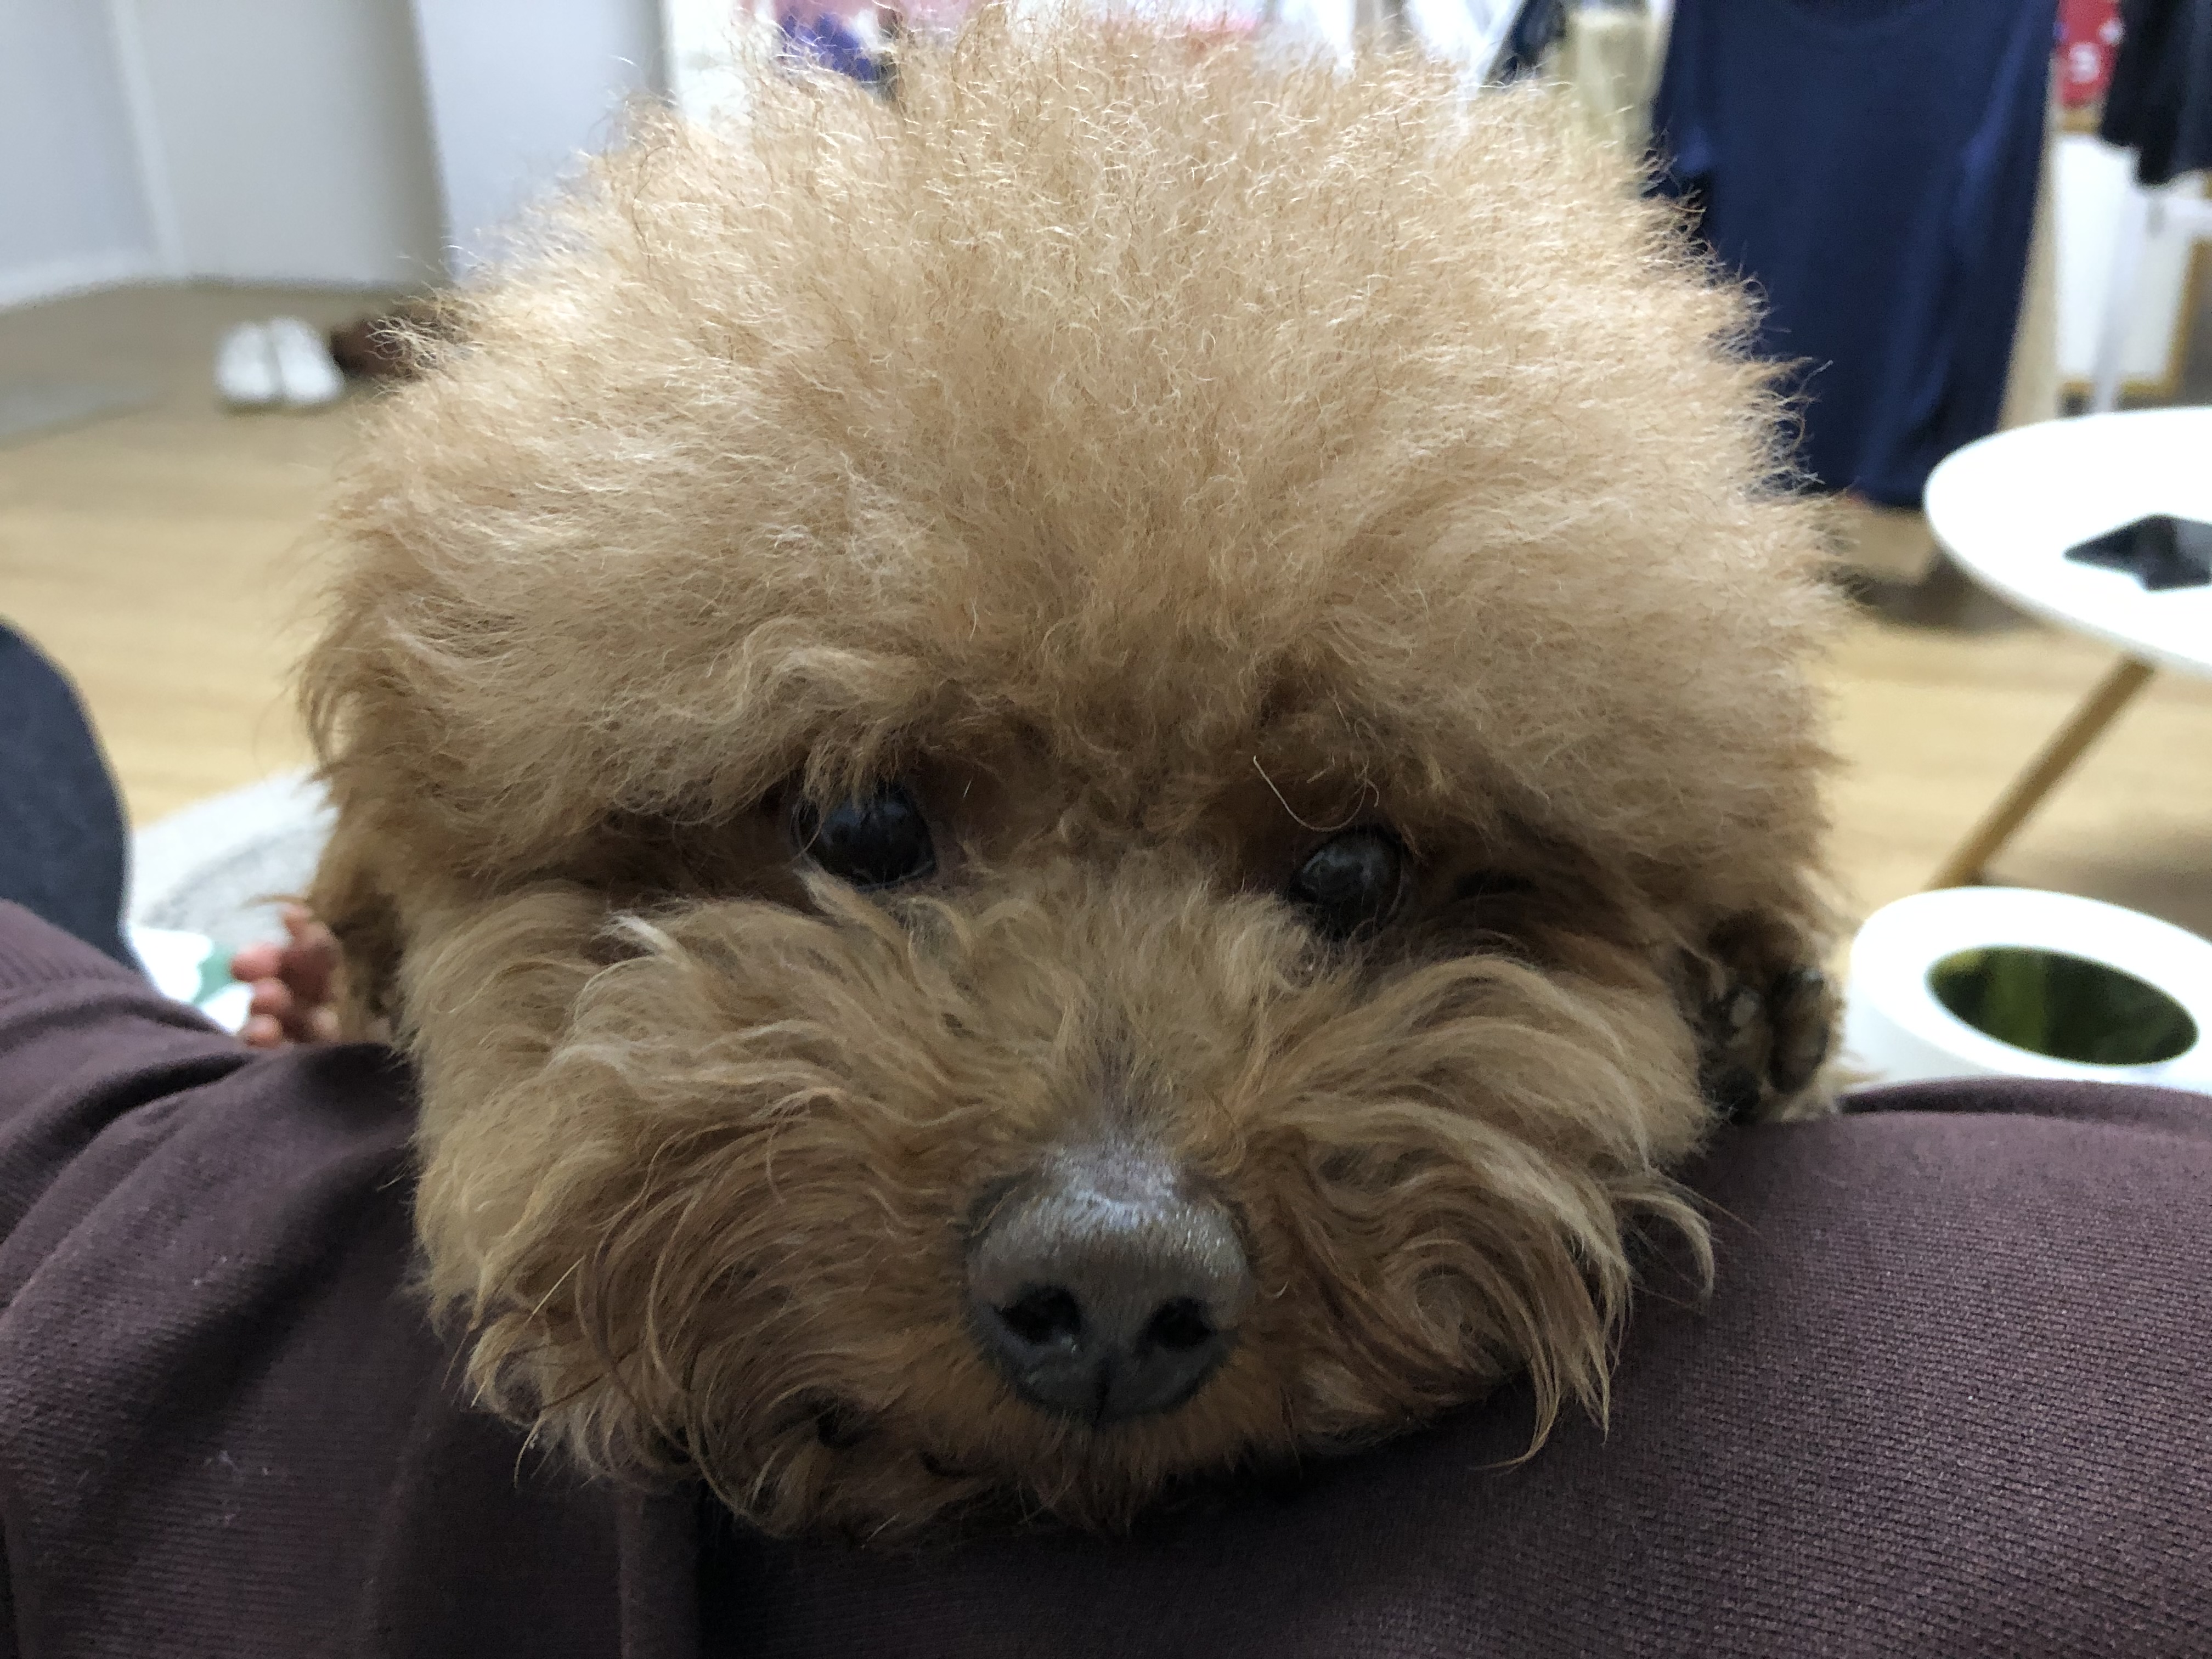 Coffee, the toy poodle